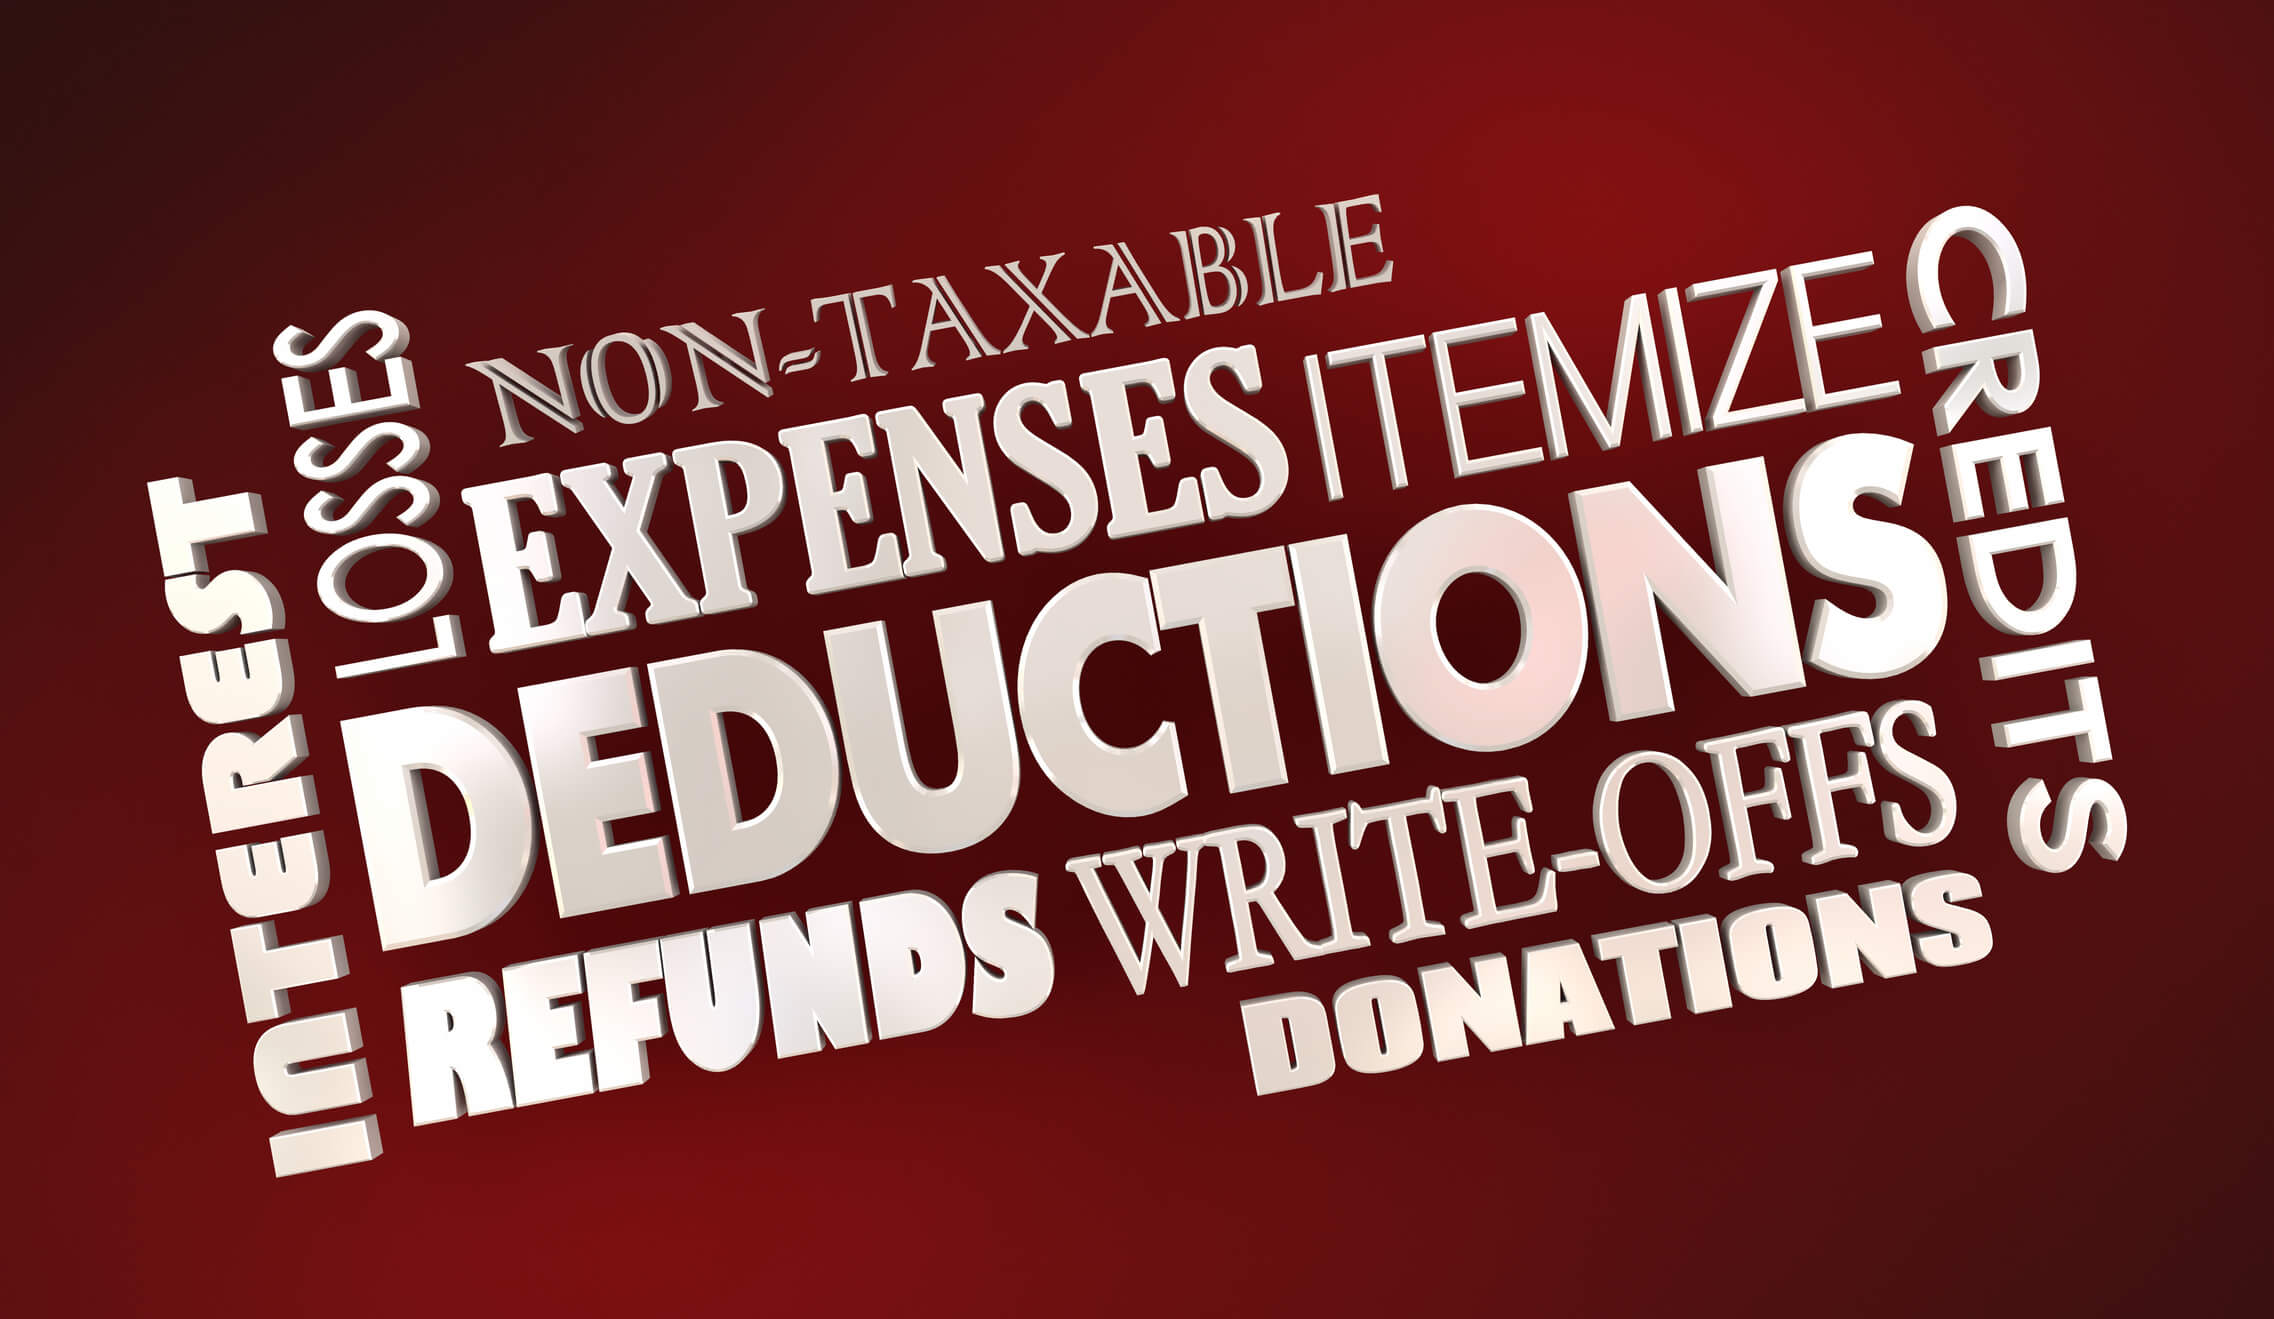 Tax Deductions - Complete Controller